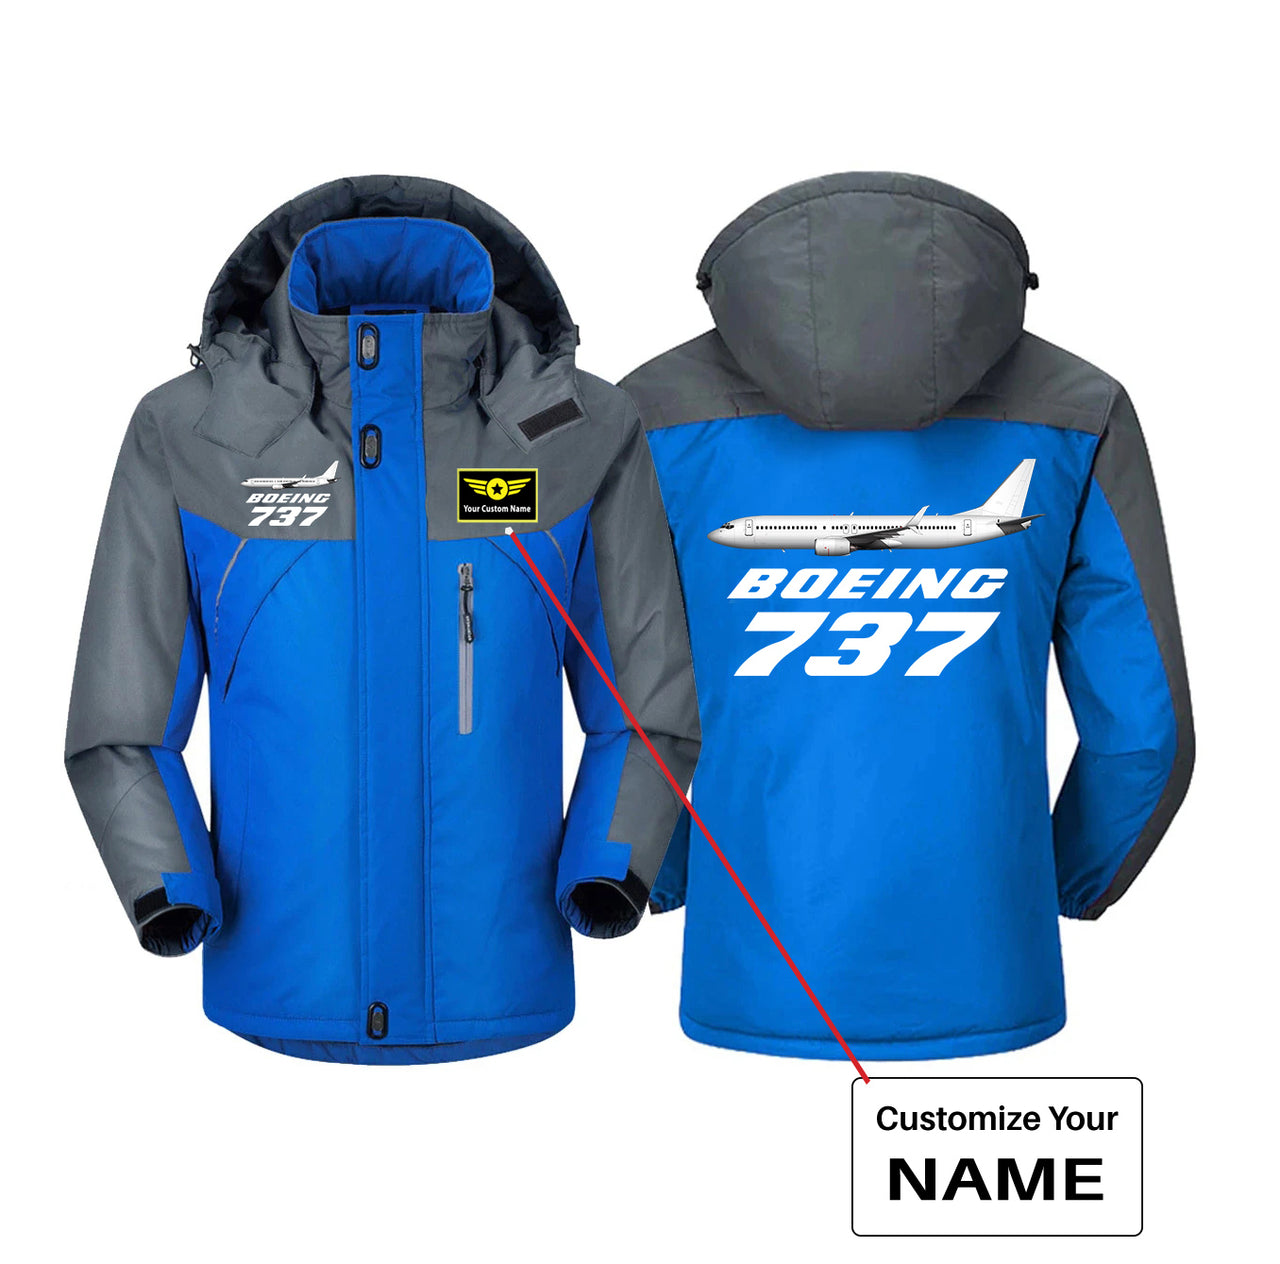 The Boeing 737 Designed Thick Winter Jackets